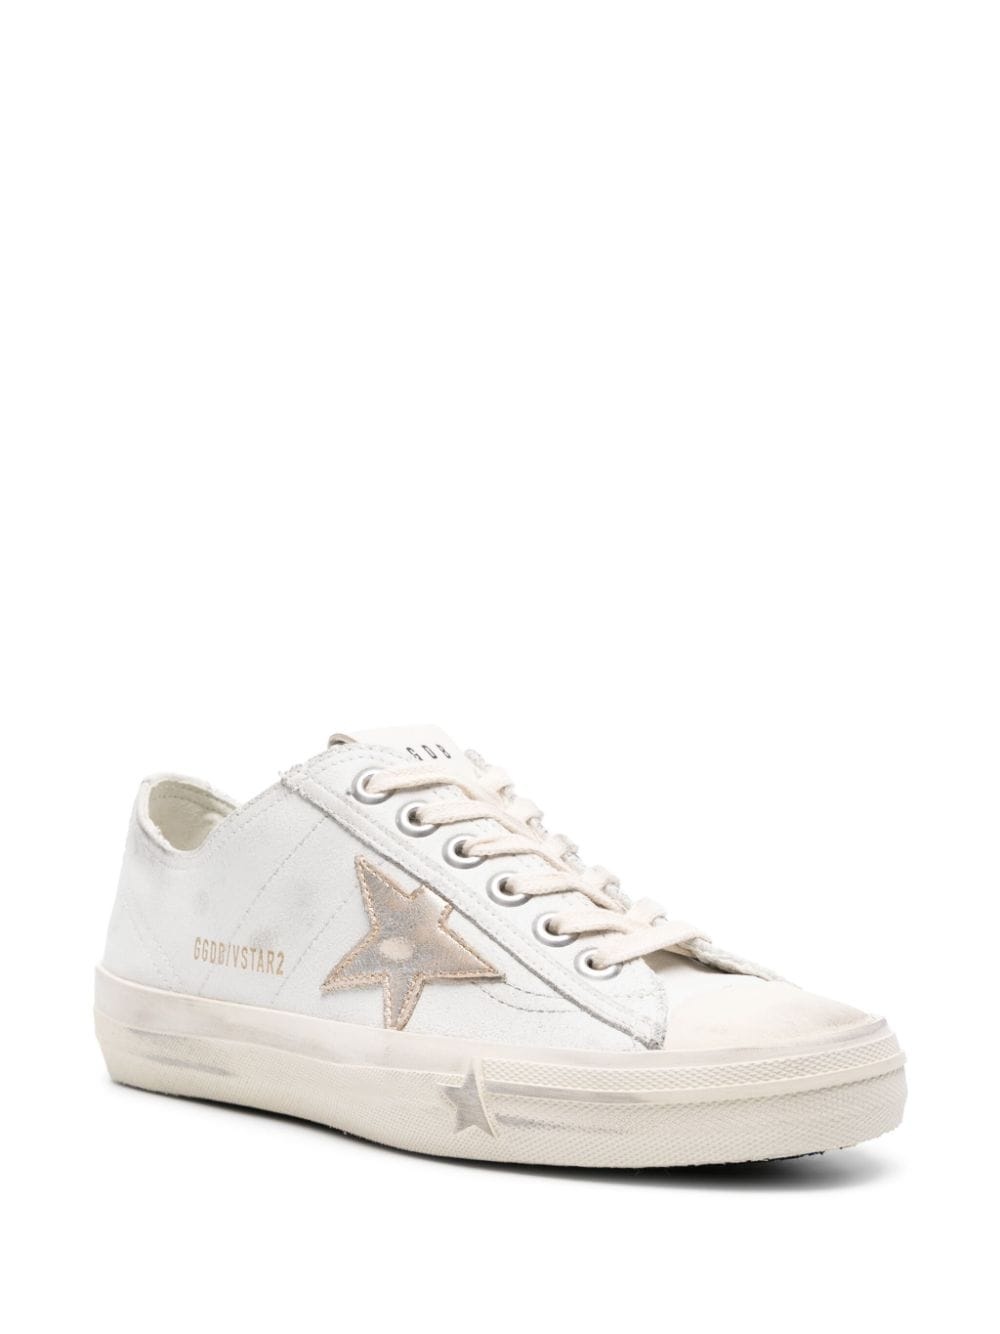 V-Star 2 leather sneakers - 2